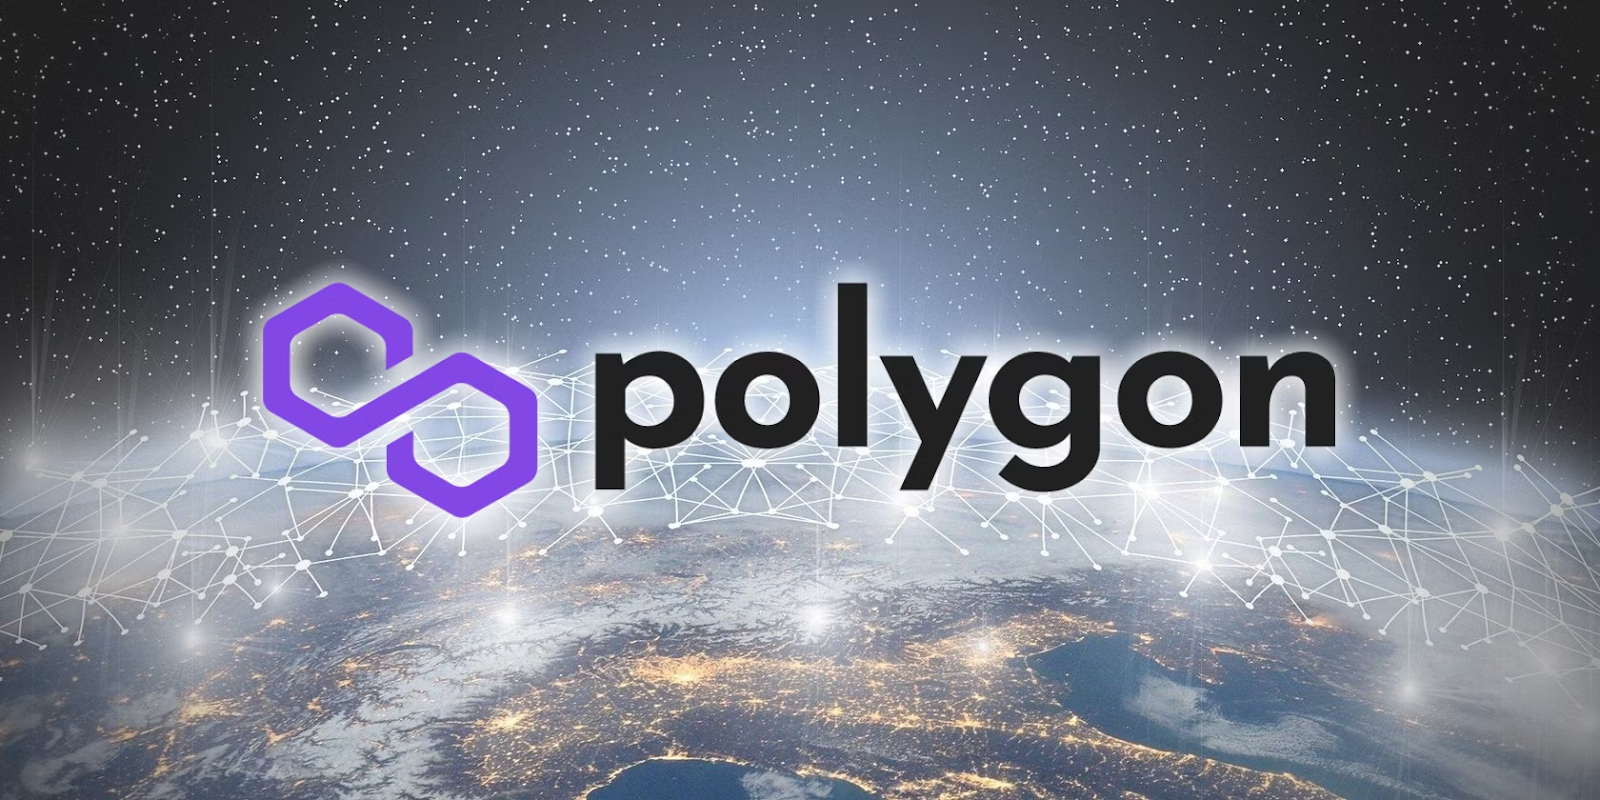 MoonBag Scalability: Scaling to New Heights with a 10x Vision According to Analyst, While Celestia and Polygon Falter with Challenges = The Bit Journal